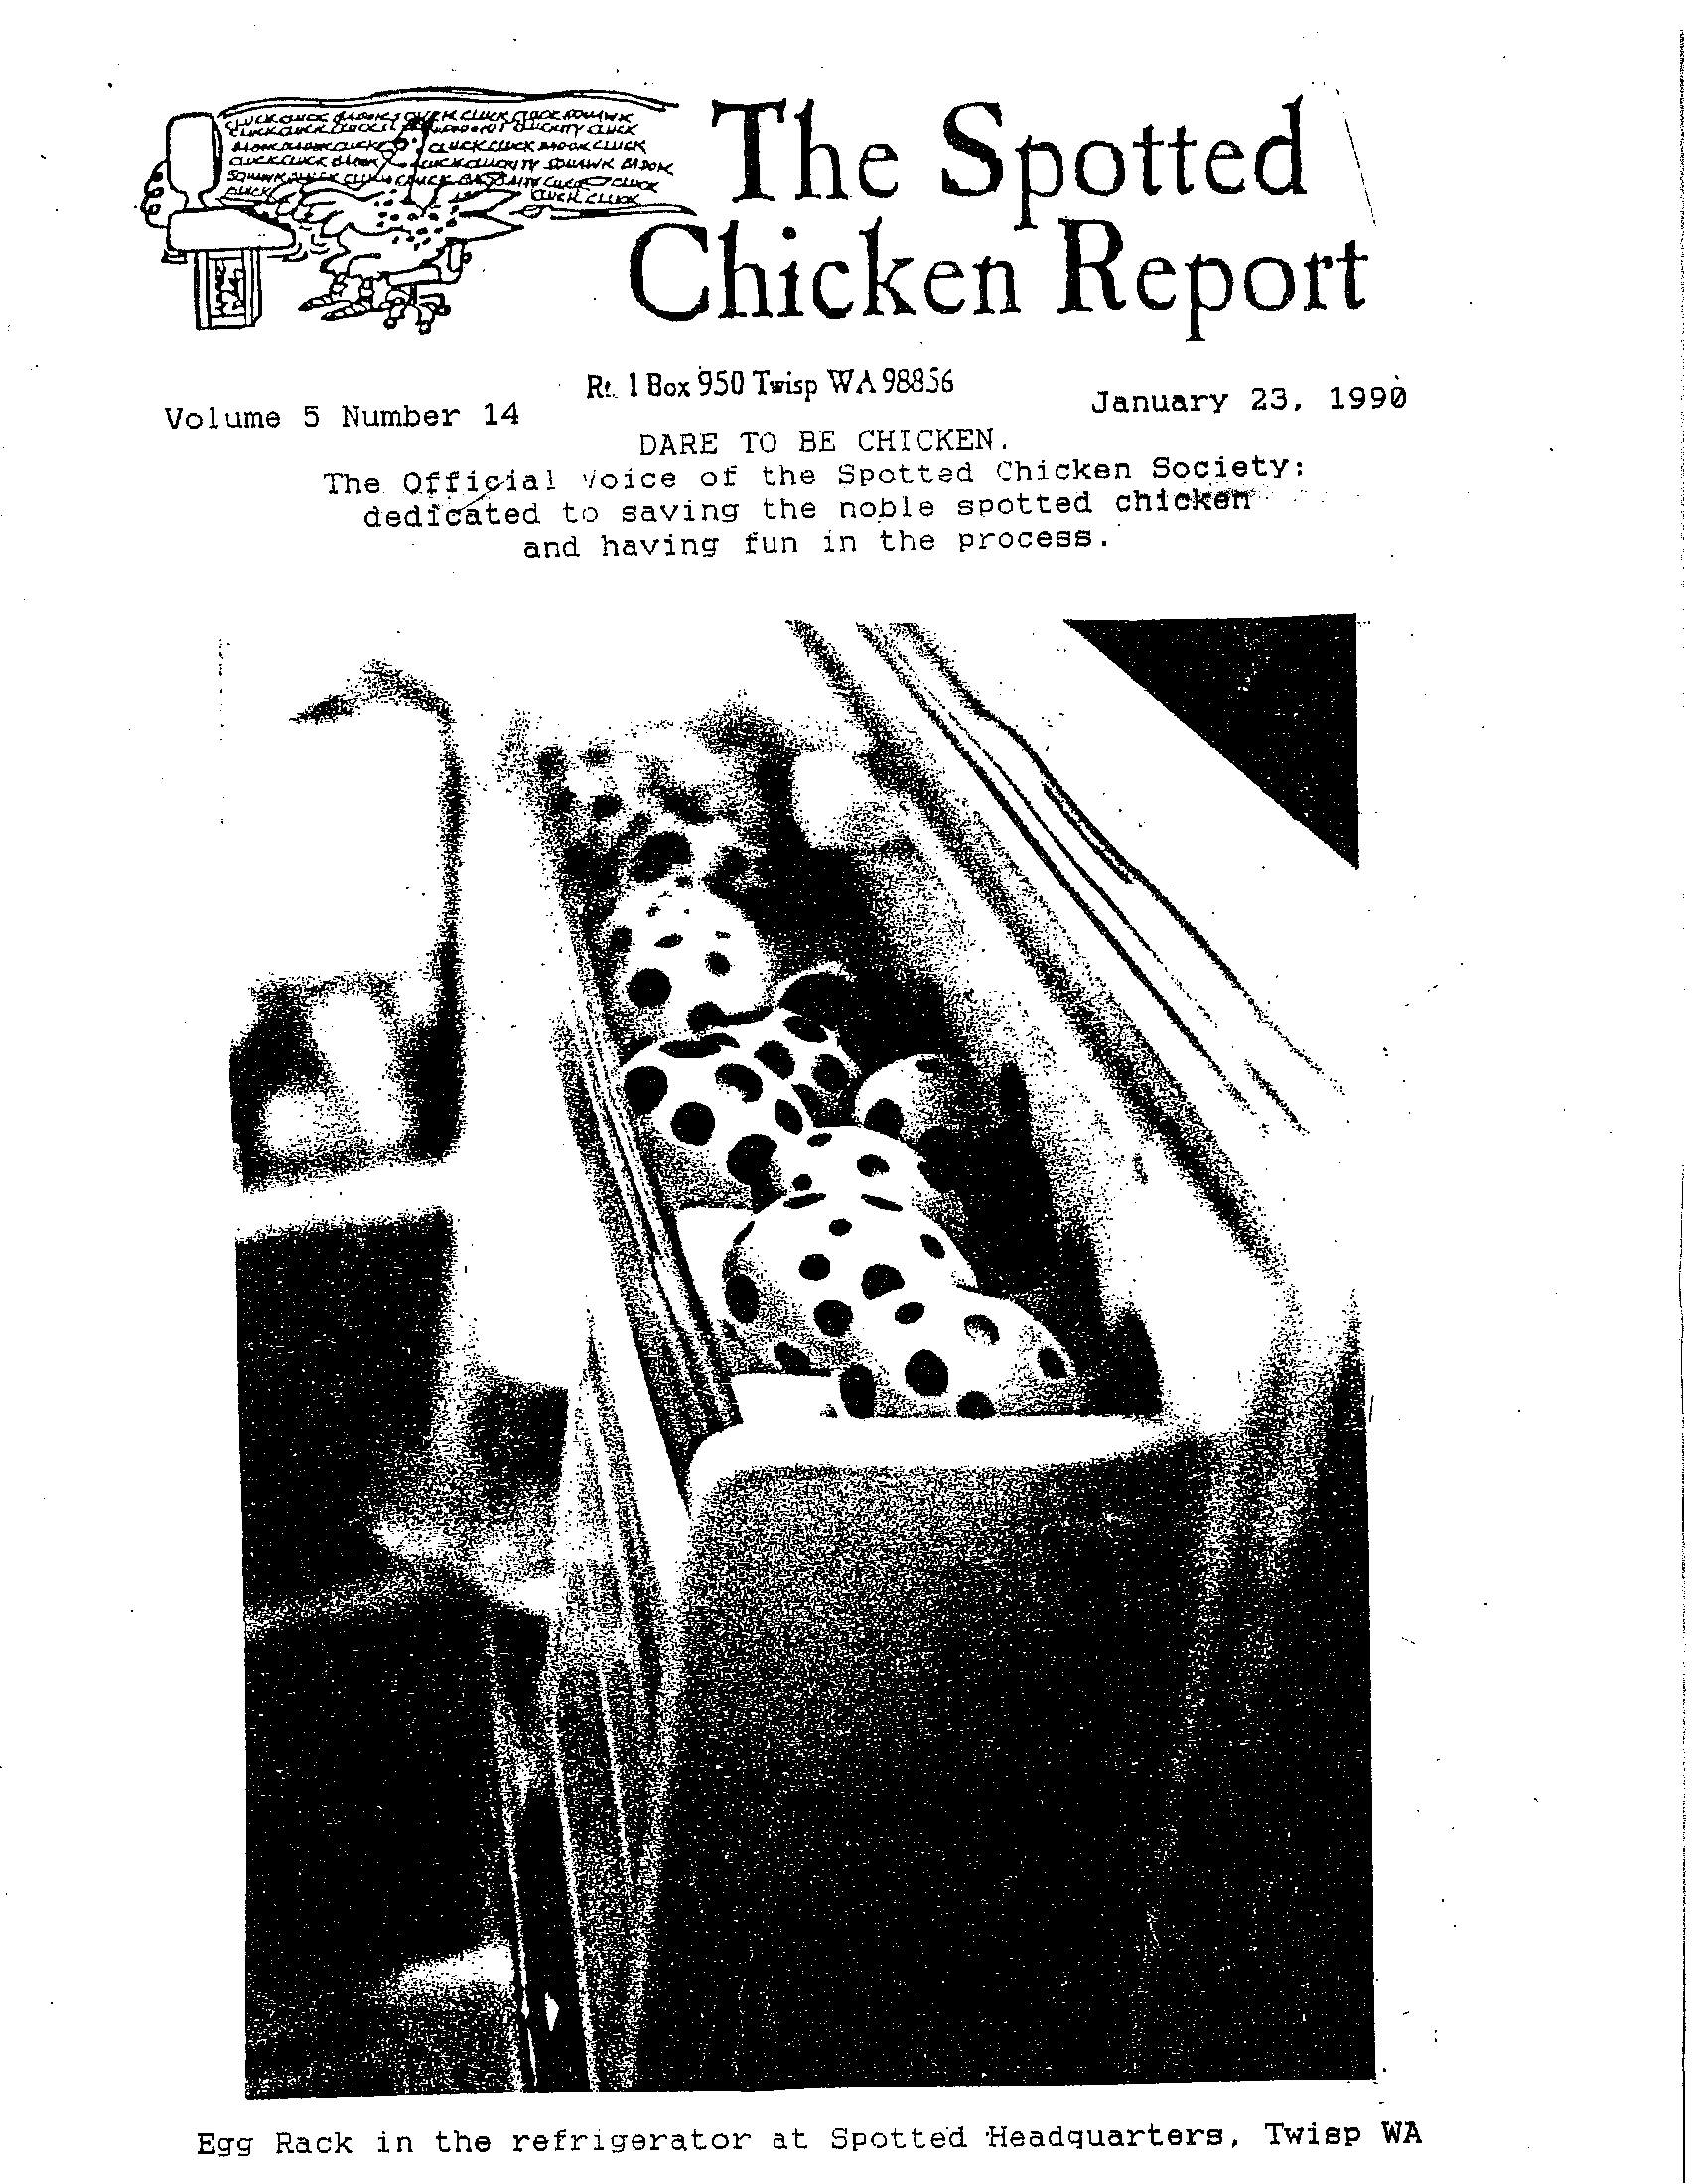 The Spotted Chicken Report_Page_001.png